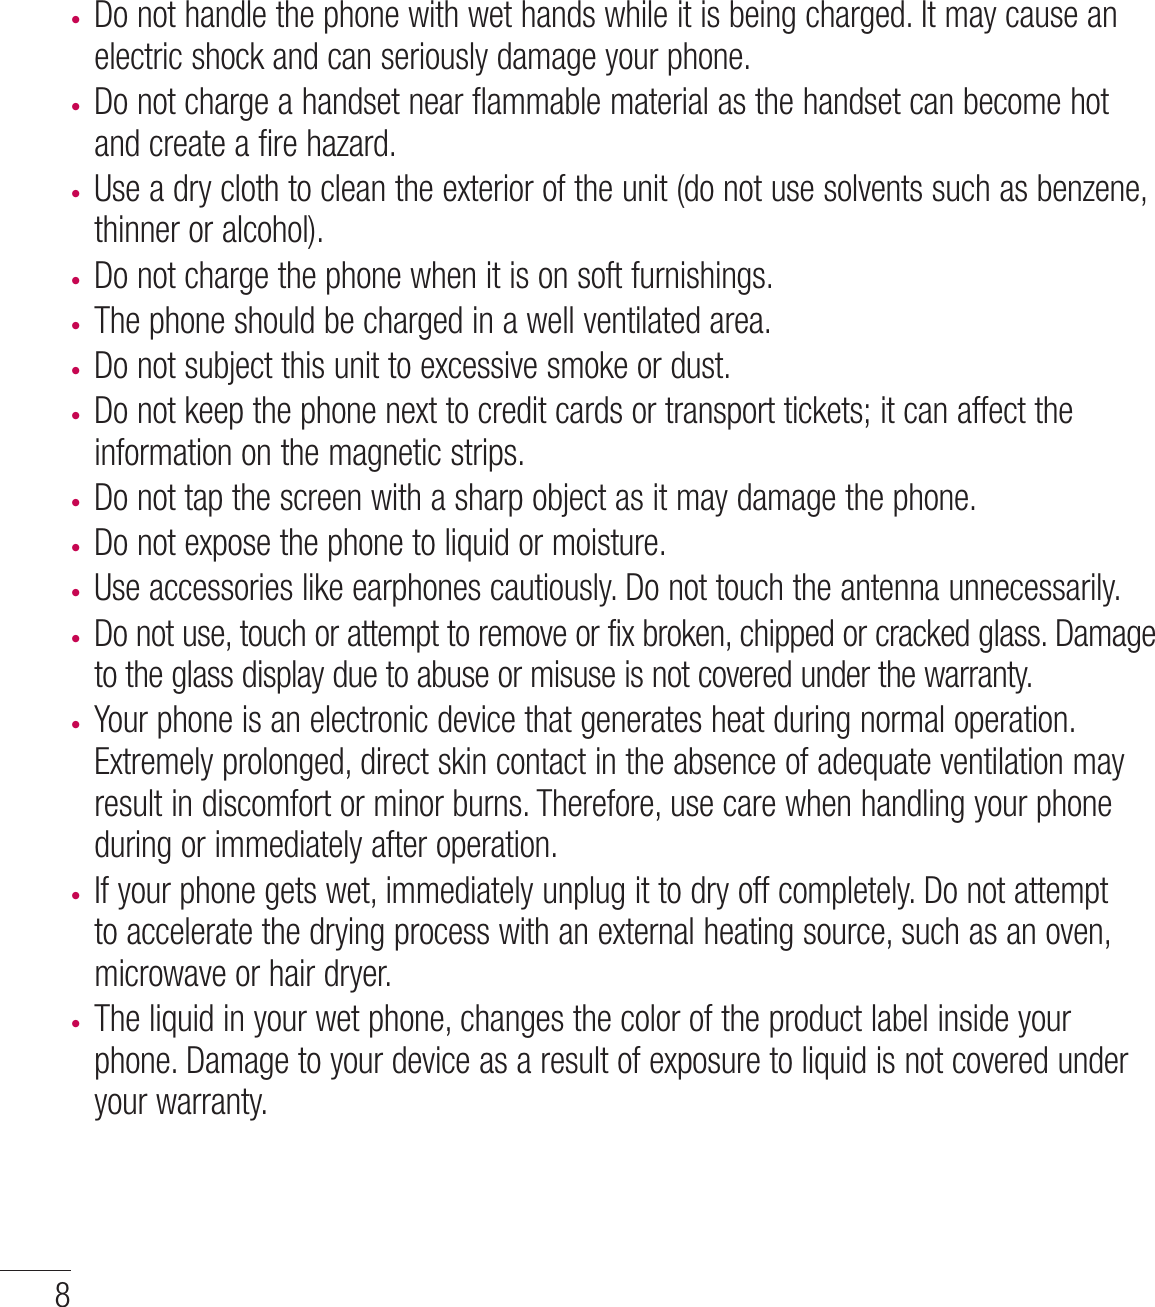 8tDo not handle the phone with wet hands while it is being charged. It may cause an electric shock and can seriously damage your phone.t Do not charge a handset near flammable material as the handset can become hot and create a fire hazard.t Use a dry cloth to clean the exterior of the unit (do not use solvents such as benzene, thinner or alcohol).t Do not charge the phone when it is on soft furnishings.t The phone should be charged in a well ventilated area.t Do not subject this unit to excessive smoke or dust.t Do not keep the phone next to credit cards or transport tickets; it can affect the information on the magnetic strips.t Do not tap the screen with a sharp object as it may damage the phone.t Do not expose the phone to liquid or moisture.t Use accessories like earphones cautiously. Do not touch the antenna unnecessarily.t Do not use, touch or attempt to remove or fix broken, chipped or cracked glass. Damage to the glass display due to abuse or misuse is not covered under the warranty.t Your phone is an electronic device that generates heat during normal operation. Extremely prolonged, direct skin contact in the absence of adequate ventilation may result in discomfort or minor burns. Therefore, use care when handling your phone during or immediately after operation.t If your phone gets wet, immediately unplug it to dry off completely. Do not attempt to accelerate the drying process with an external heating source, such as an oven, microwave or hair dryer. t The liquid in your wet phone, changes the color of the product label inside your phone. Damage to your device as a result of exposure to liquid is not covered under your warranty.Guidelines for safe and efﬁ cient use